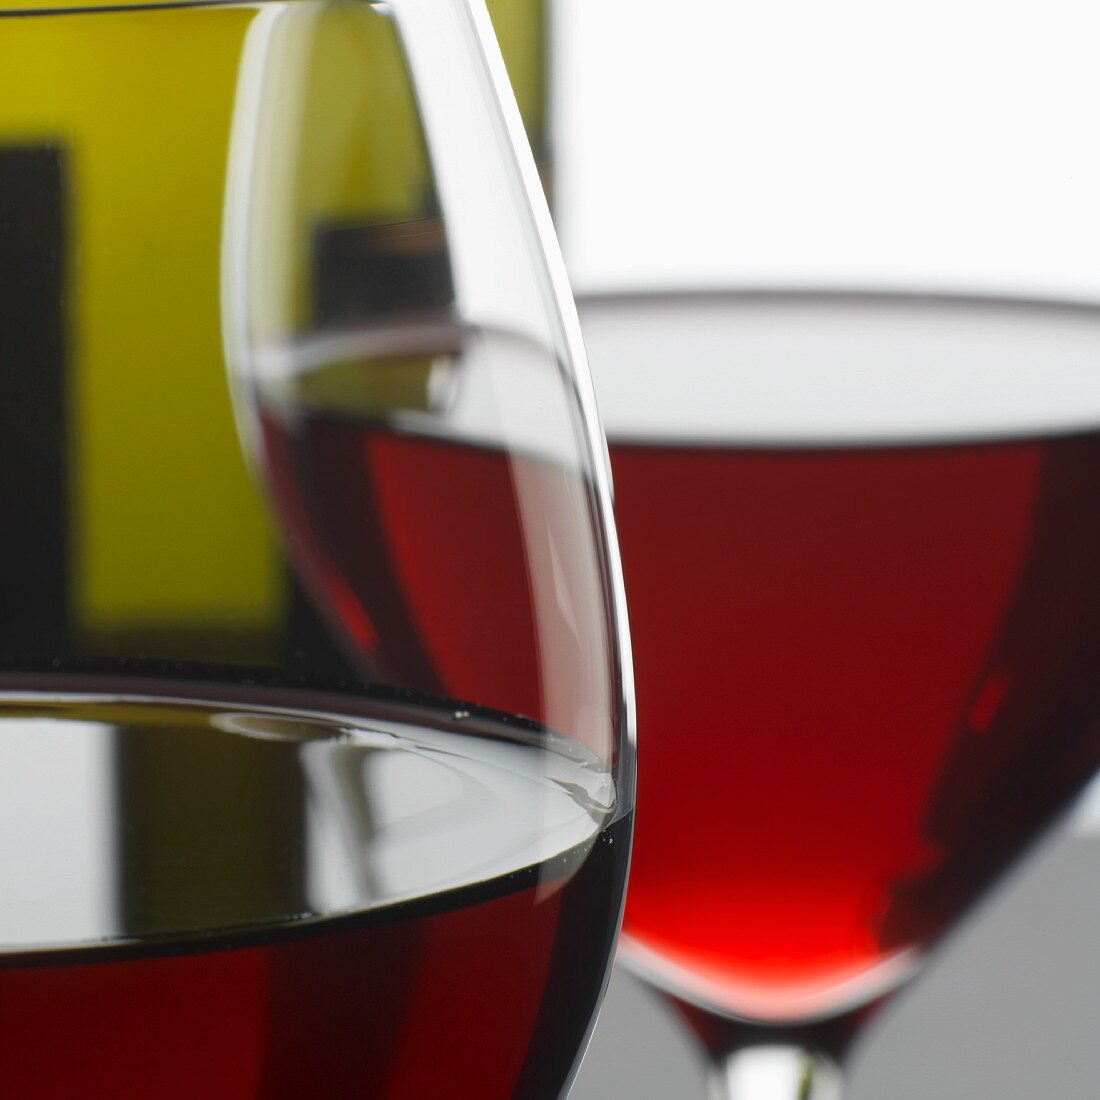 Two glasses of red wine in front of bottle (close-up)